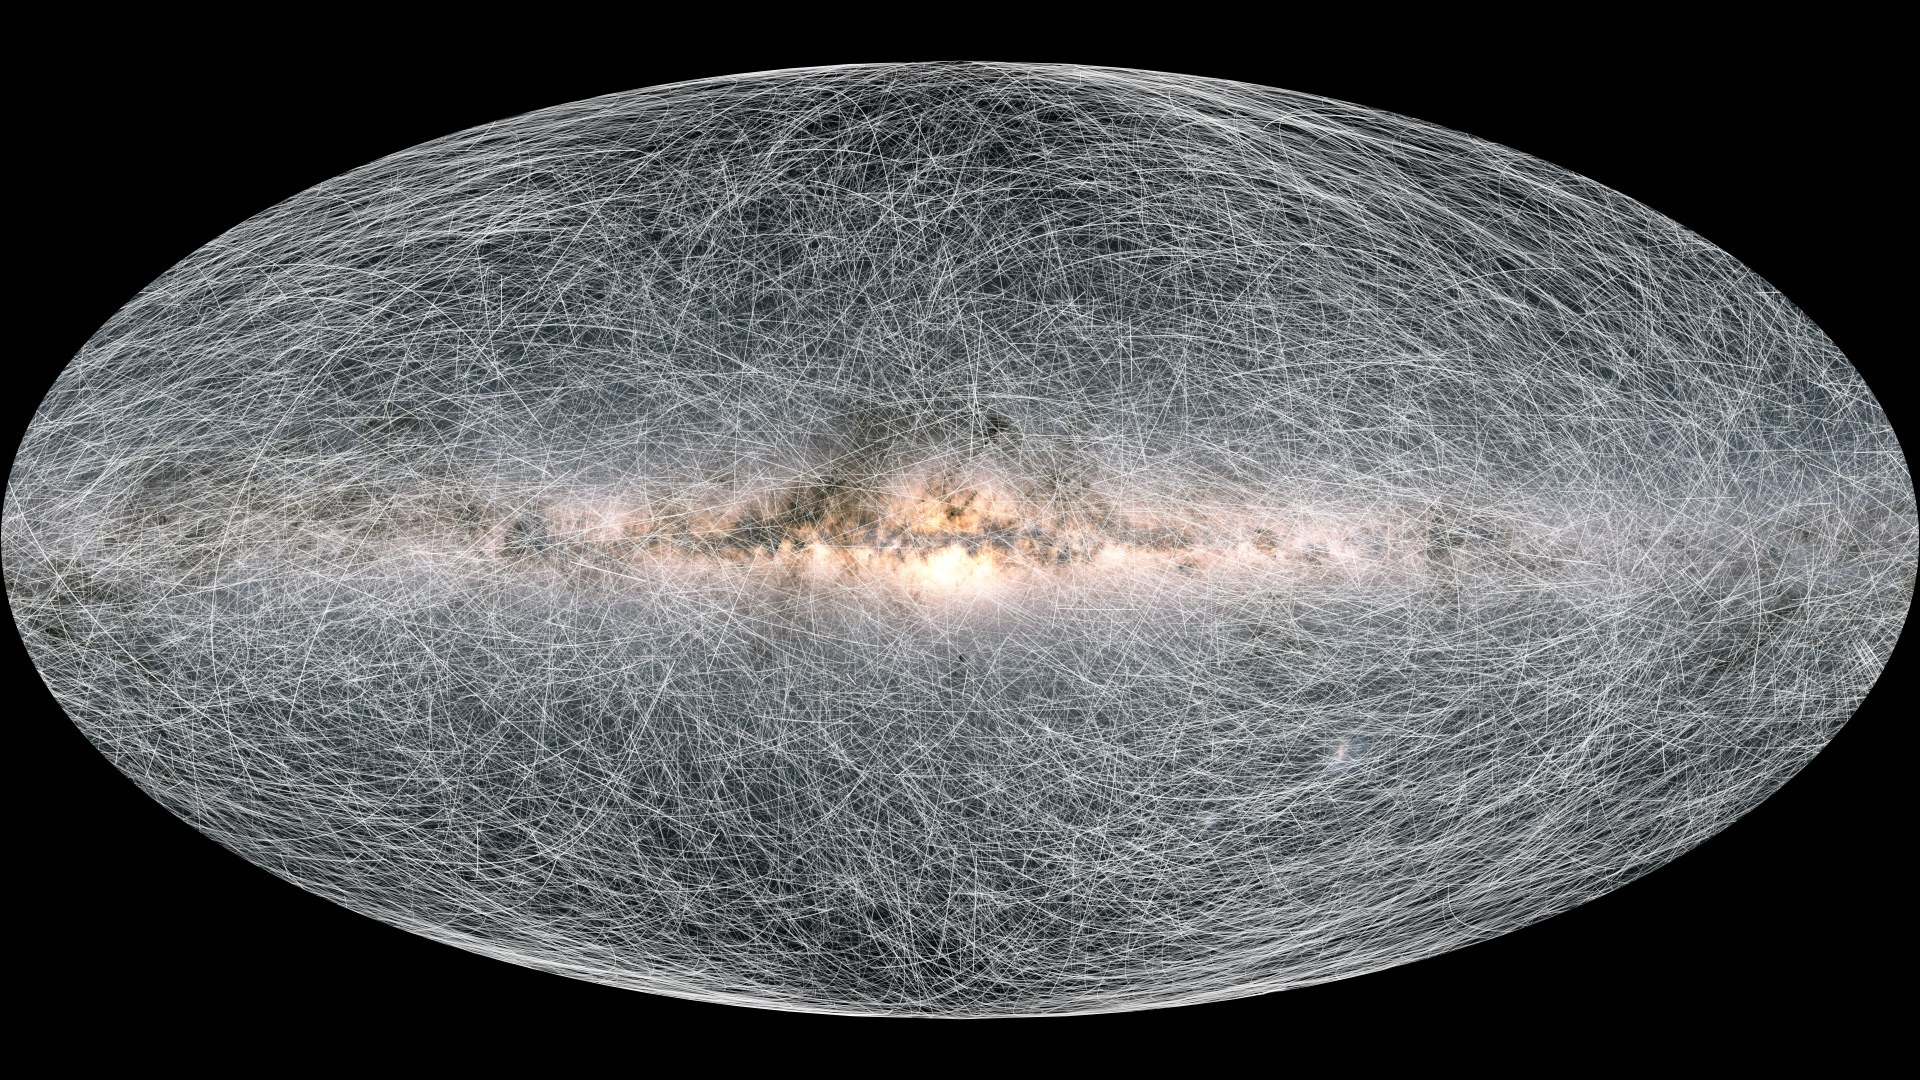 Gaia measures the movement of the stars